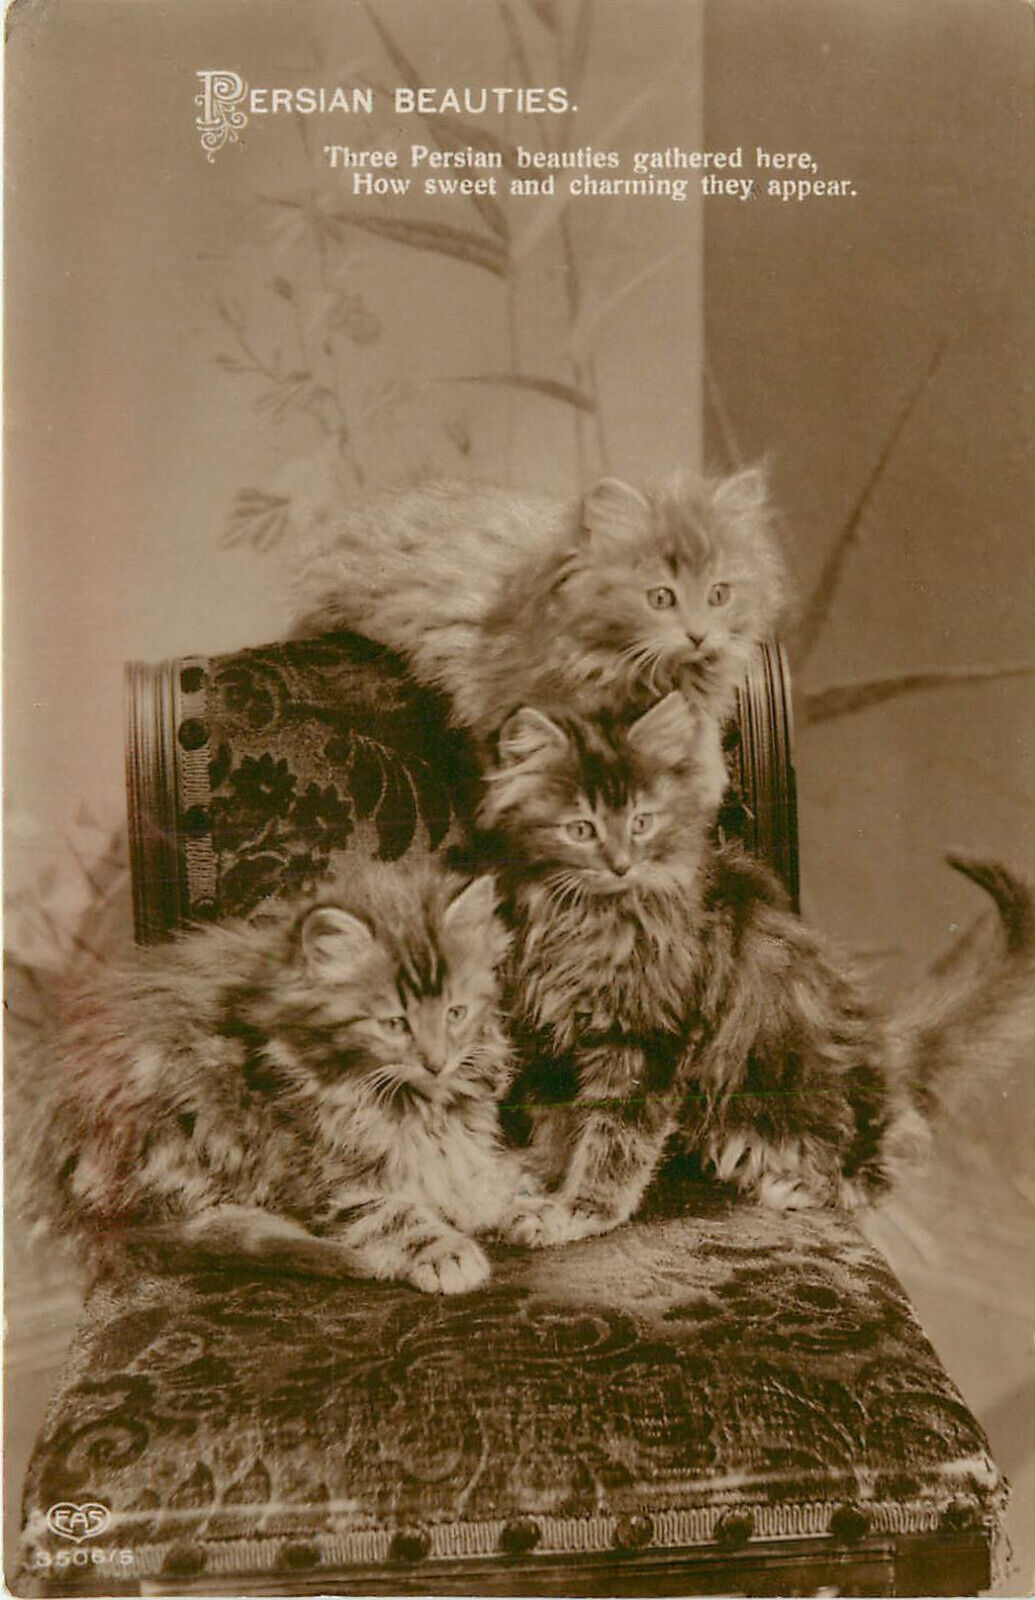 RPPC Postcard Long Haired Fluffy Kittens Persian Beauties EAS 5506